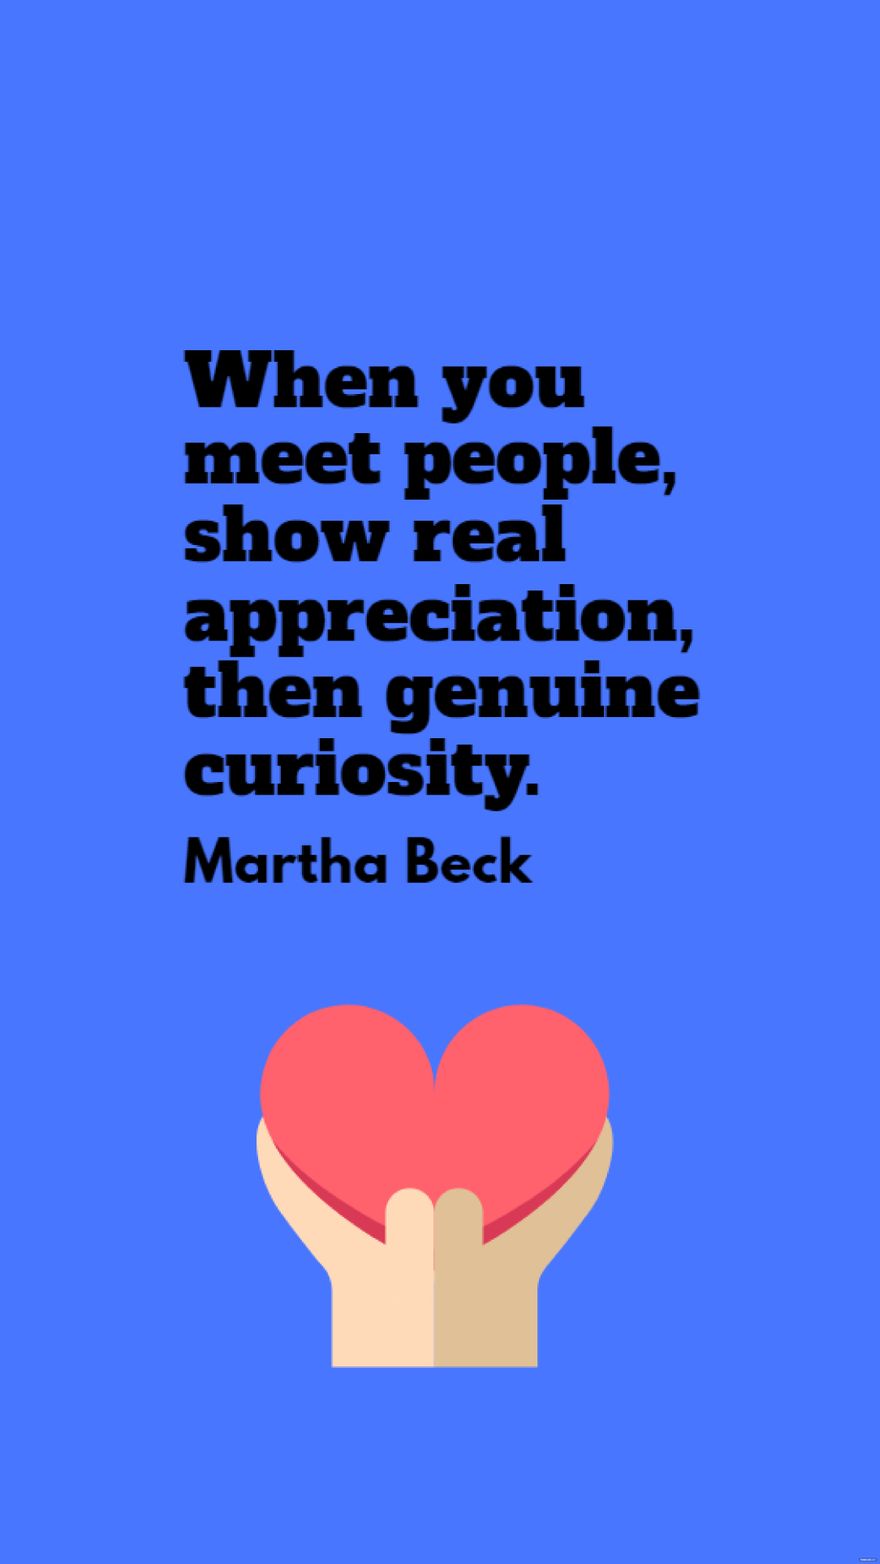 Martha Beck - When you meet people, show real appreciation, then genuine curiosity. in JPG